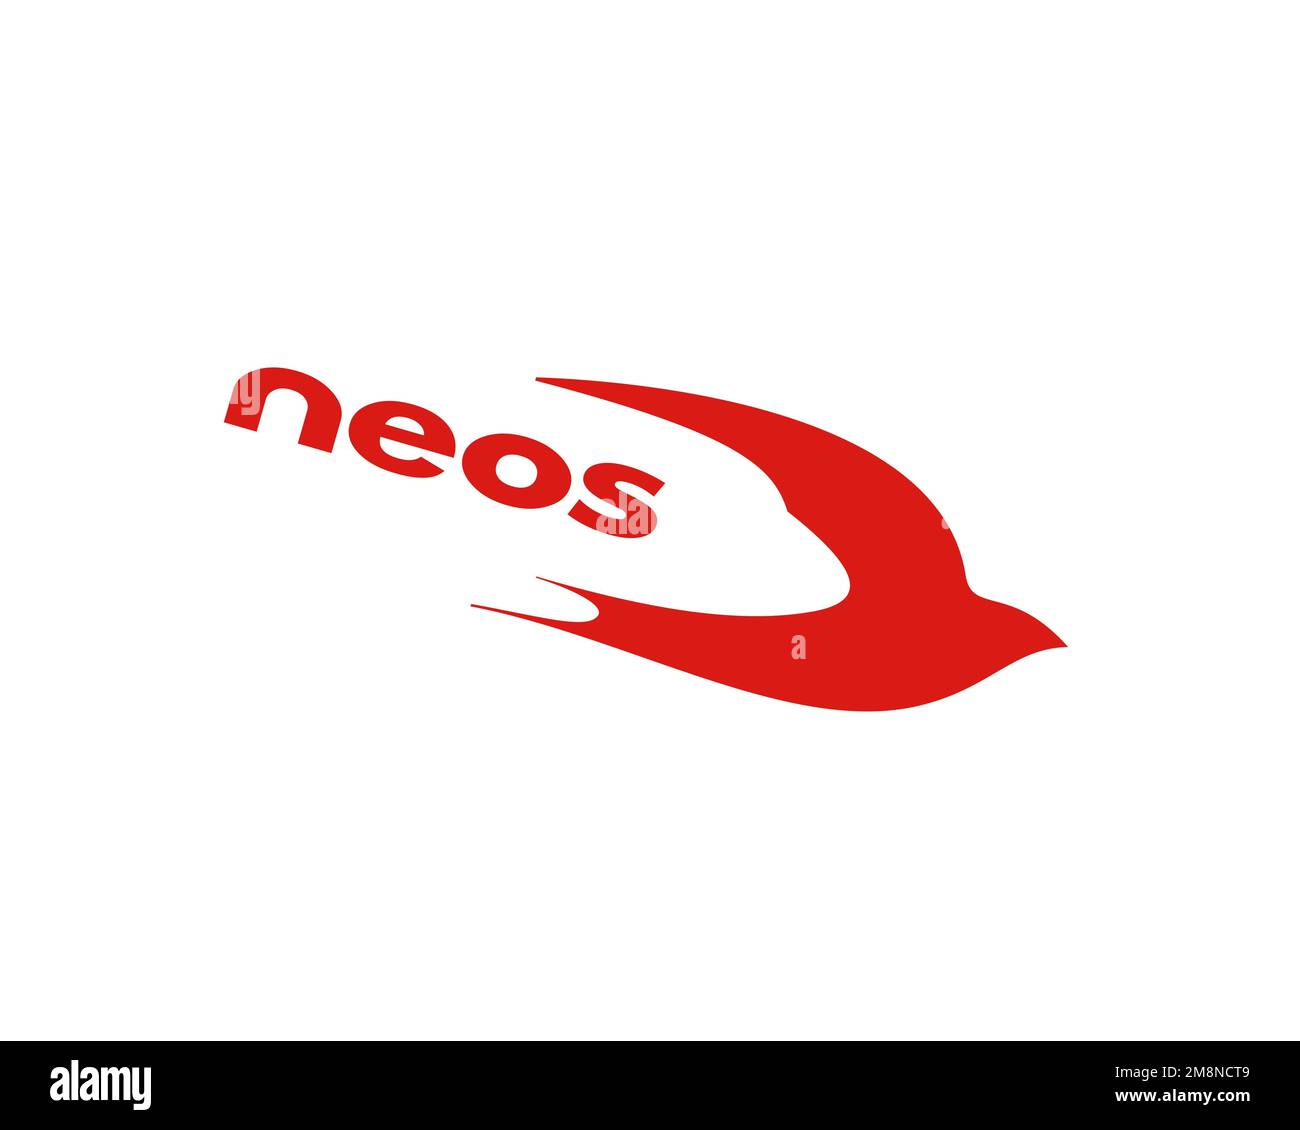 Neos airline, rotated logo, white background B Stock Photo - Alamy